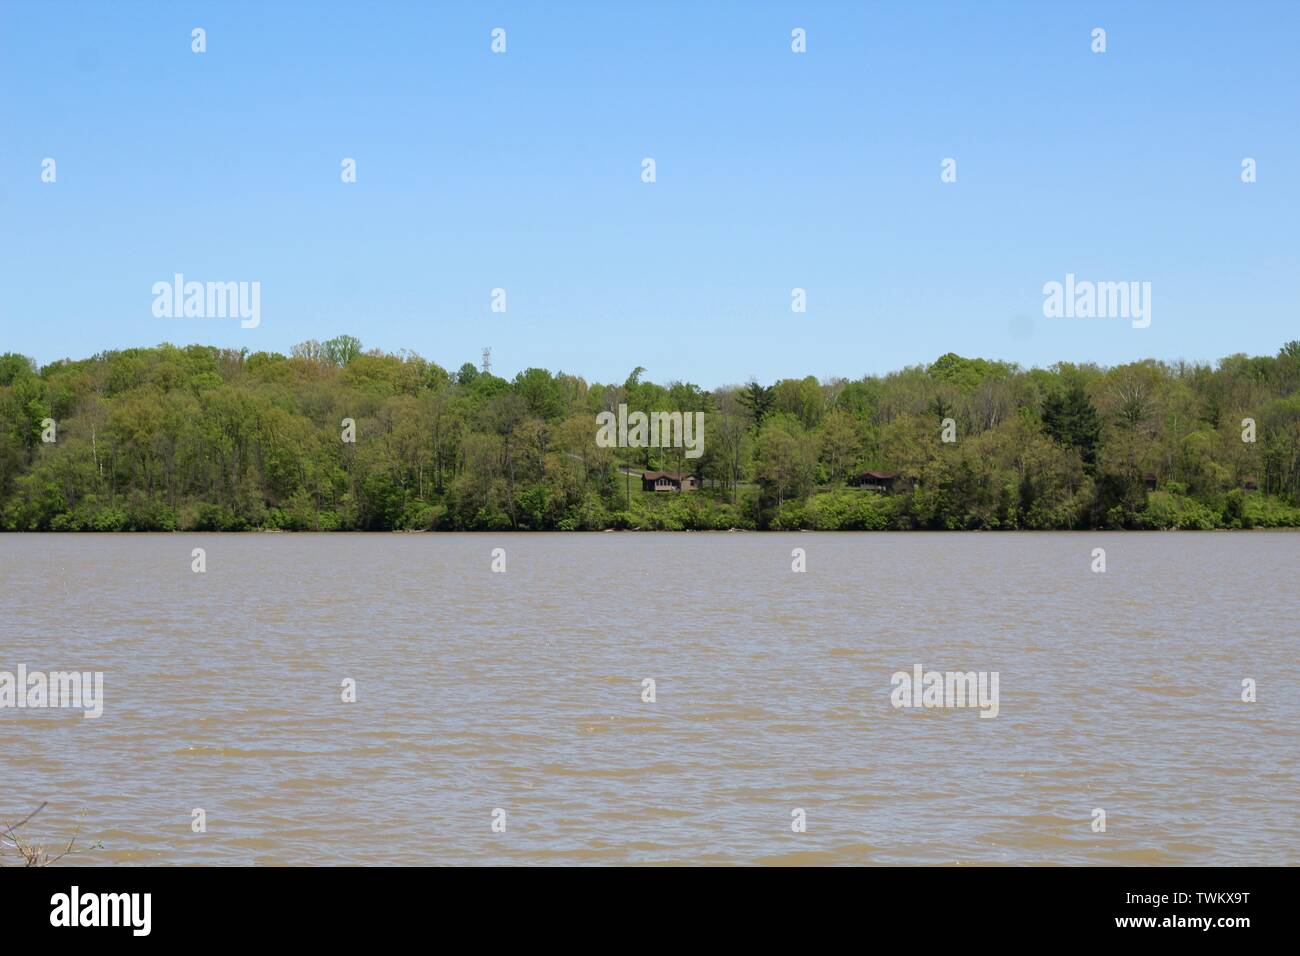 A day of boats on the water of the lake at Hueston Woods State Park in Ohio. Stock Photo